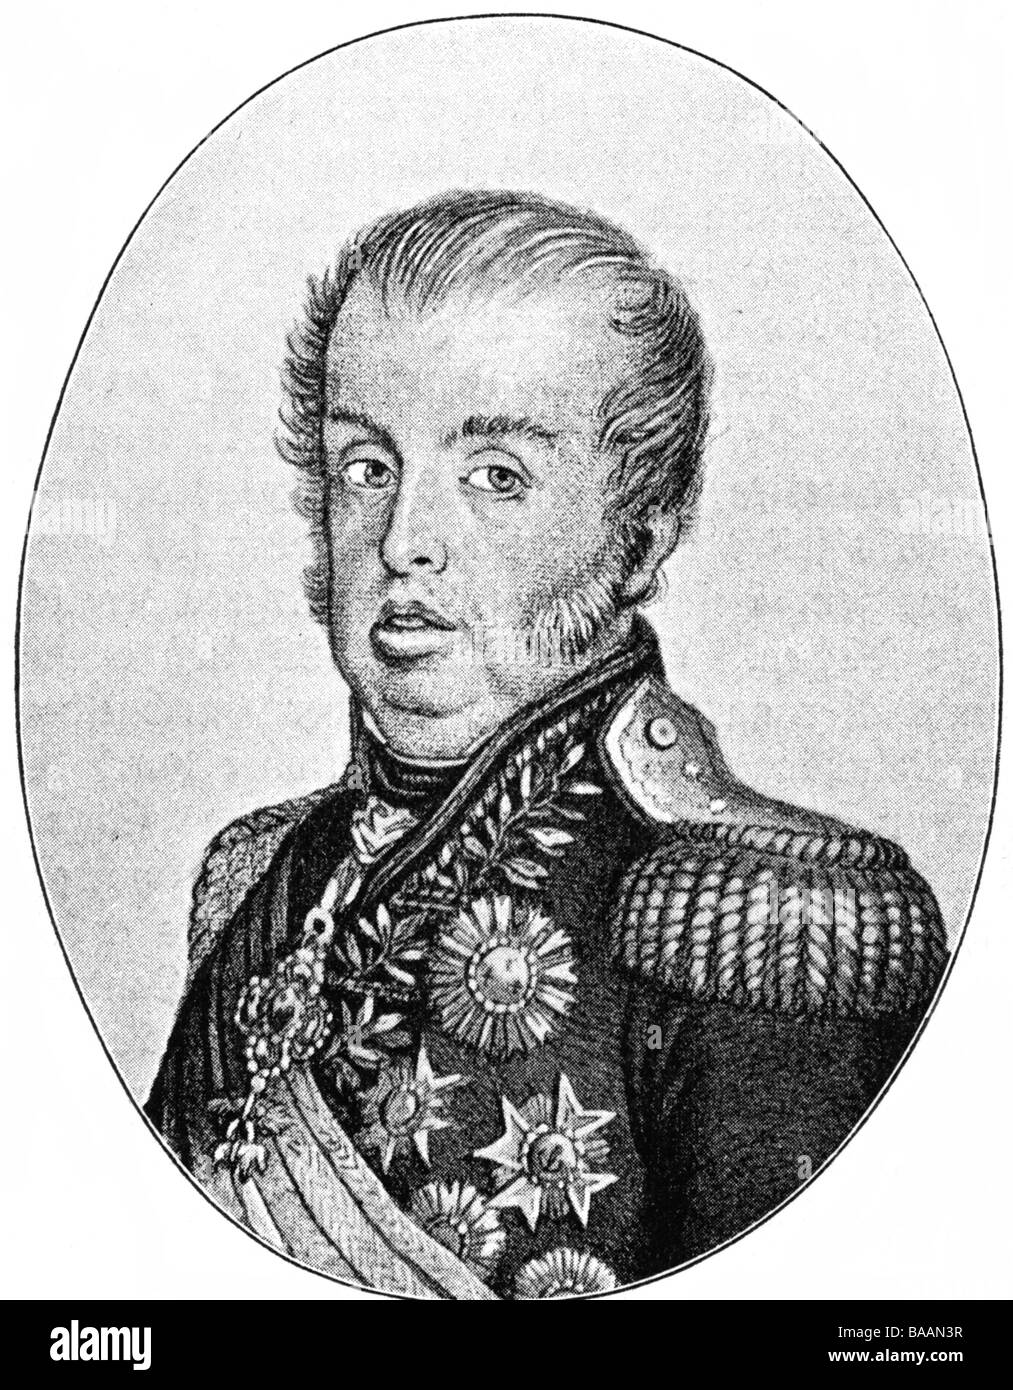 John VI, 13.5.1767 - 10.3.1826, King of Portugal 1816 - 1826, portrait, after contemporary copper engraving, 19th century, Artist's Copyright has not to be cleared Stock Photo